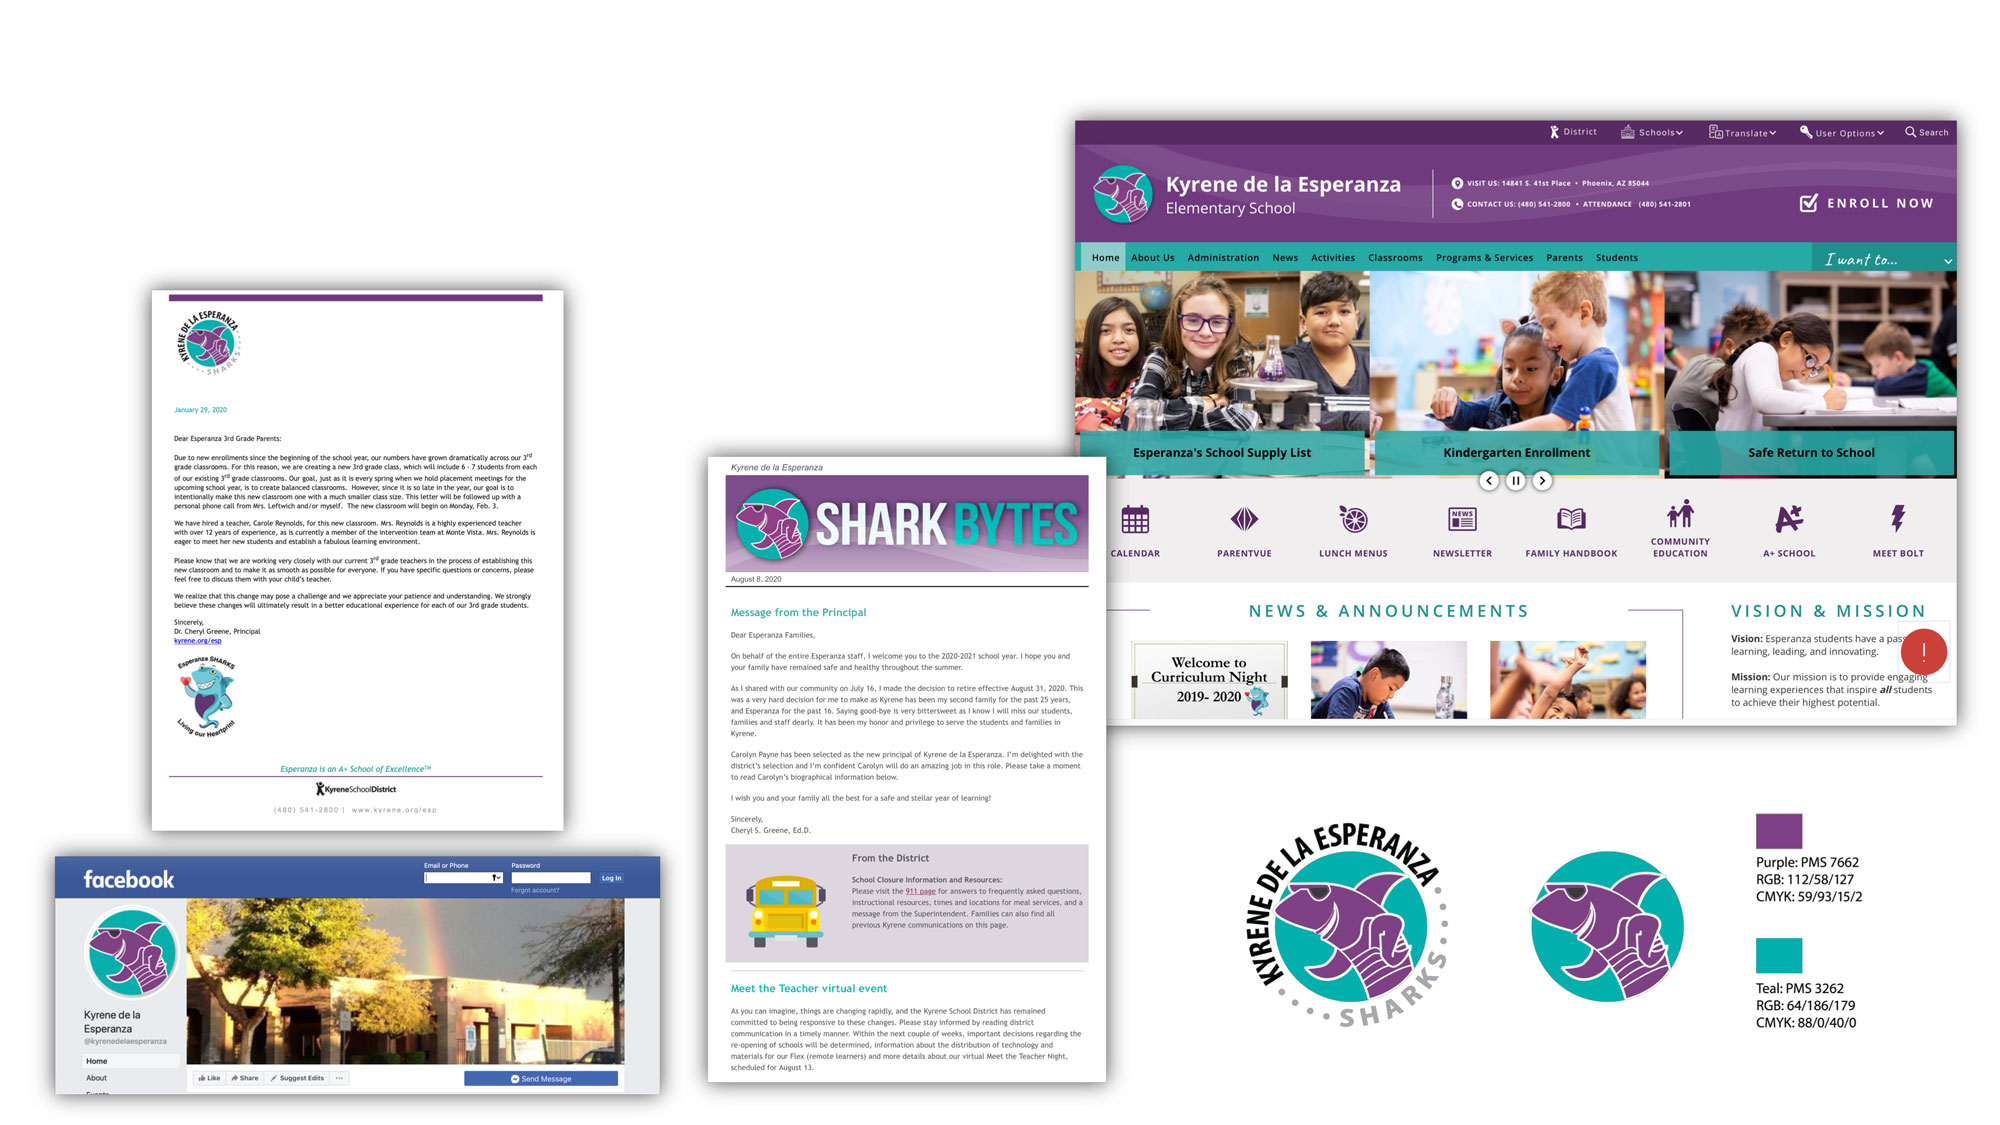 featured image four:Kyrene School District - Overall School Branding